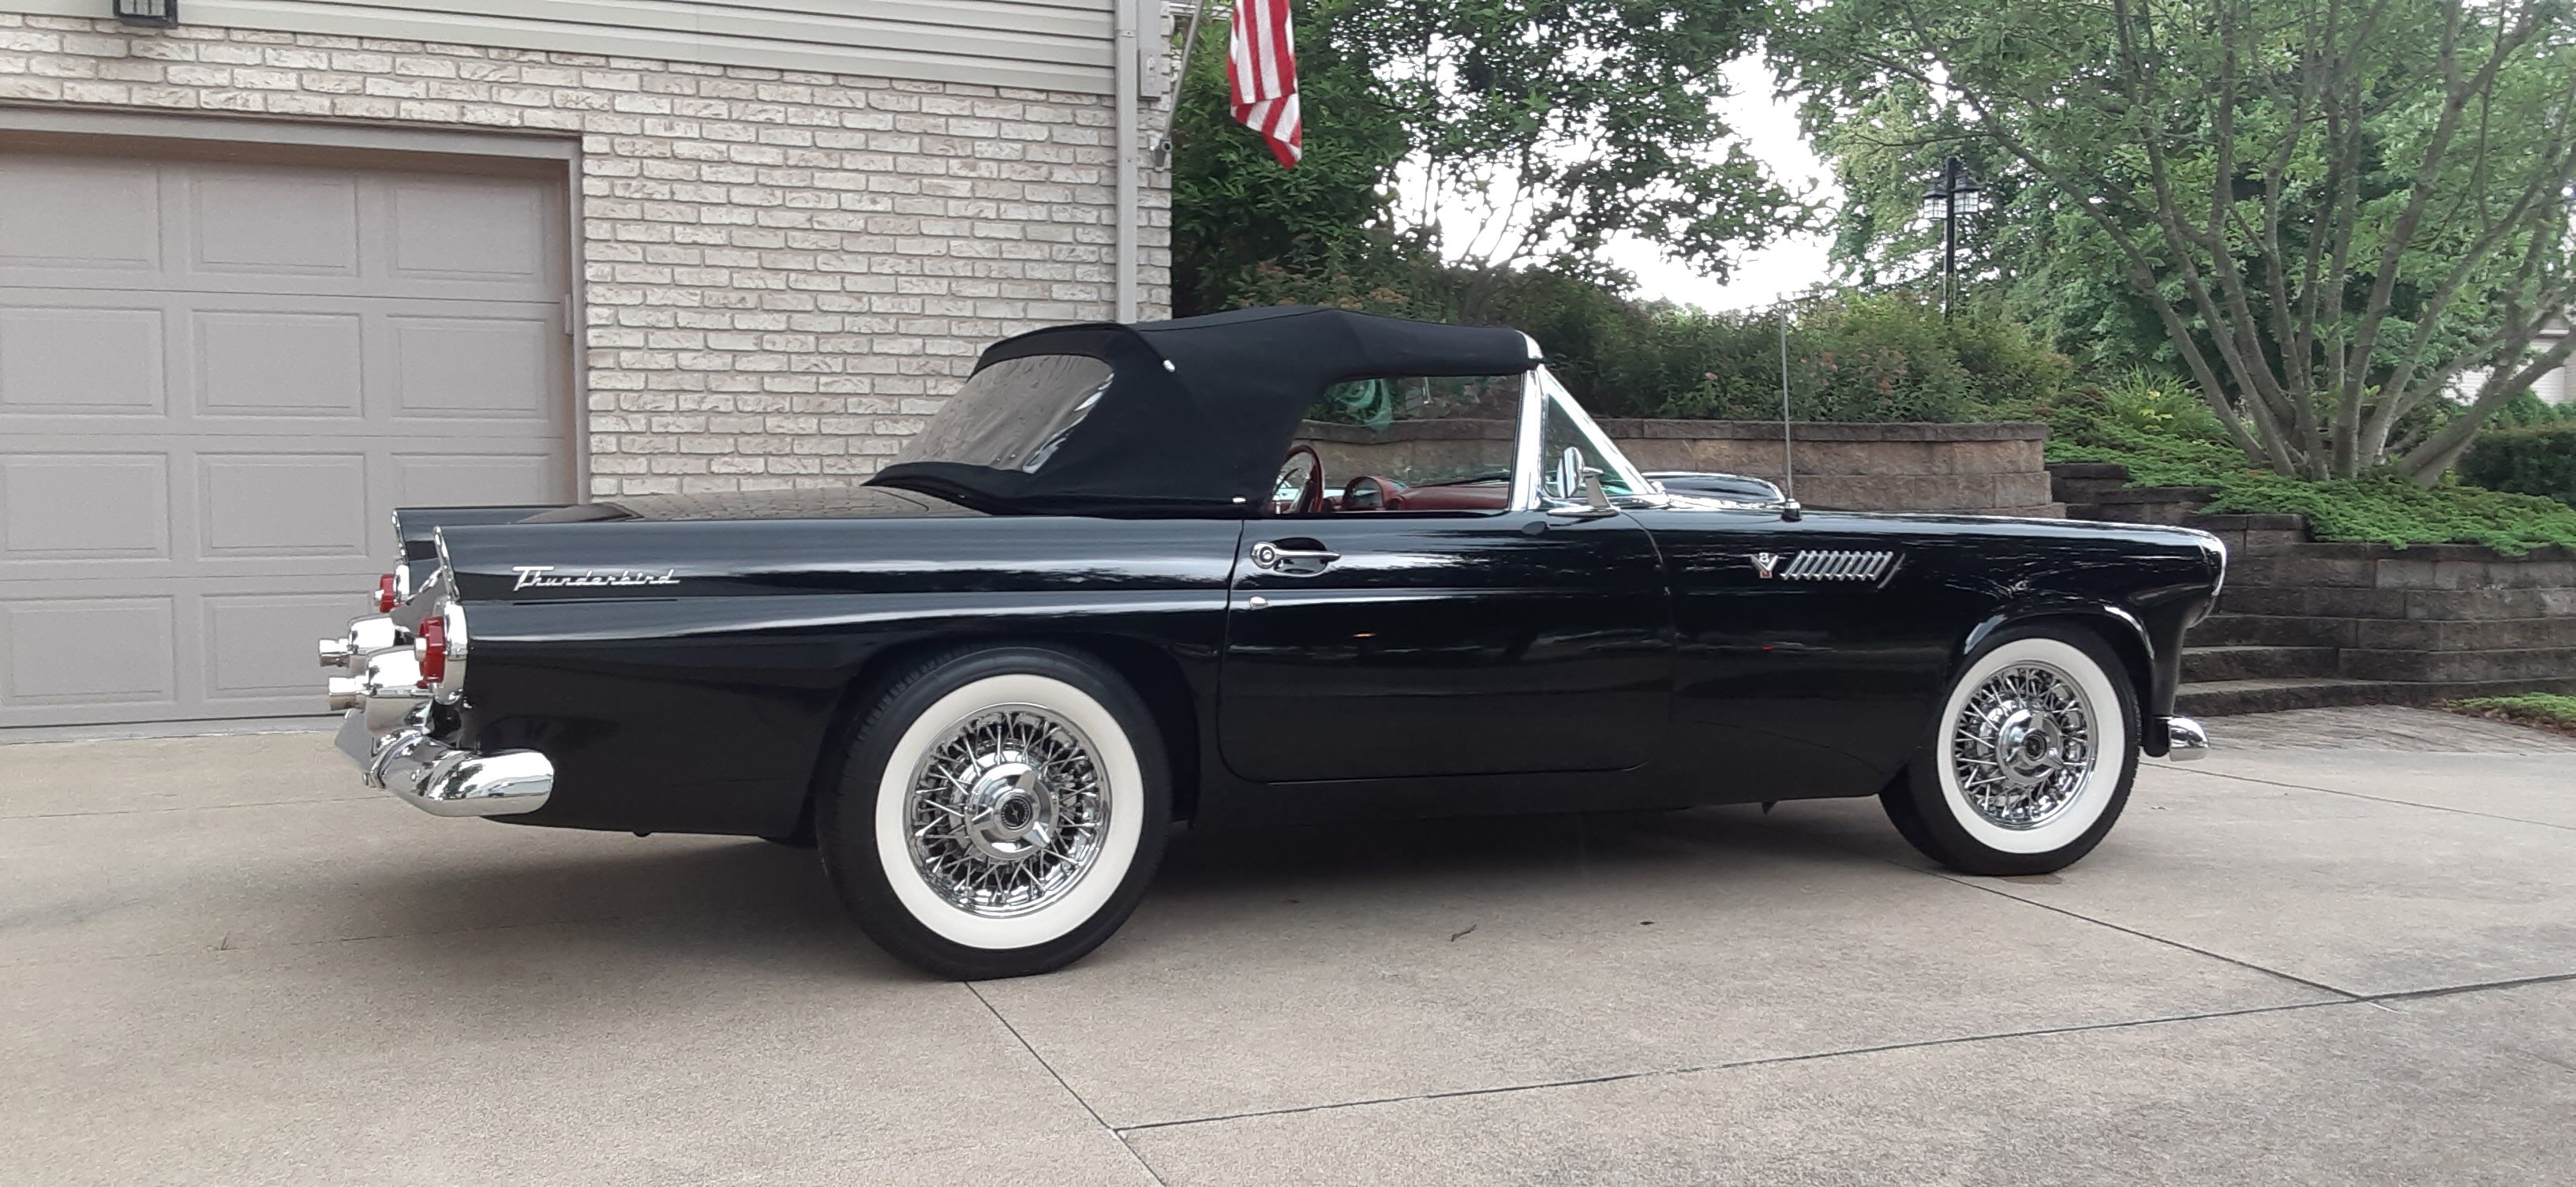 1955 Ford Thunderbird With Soft Top on